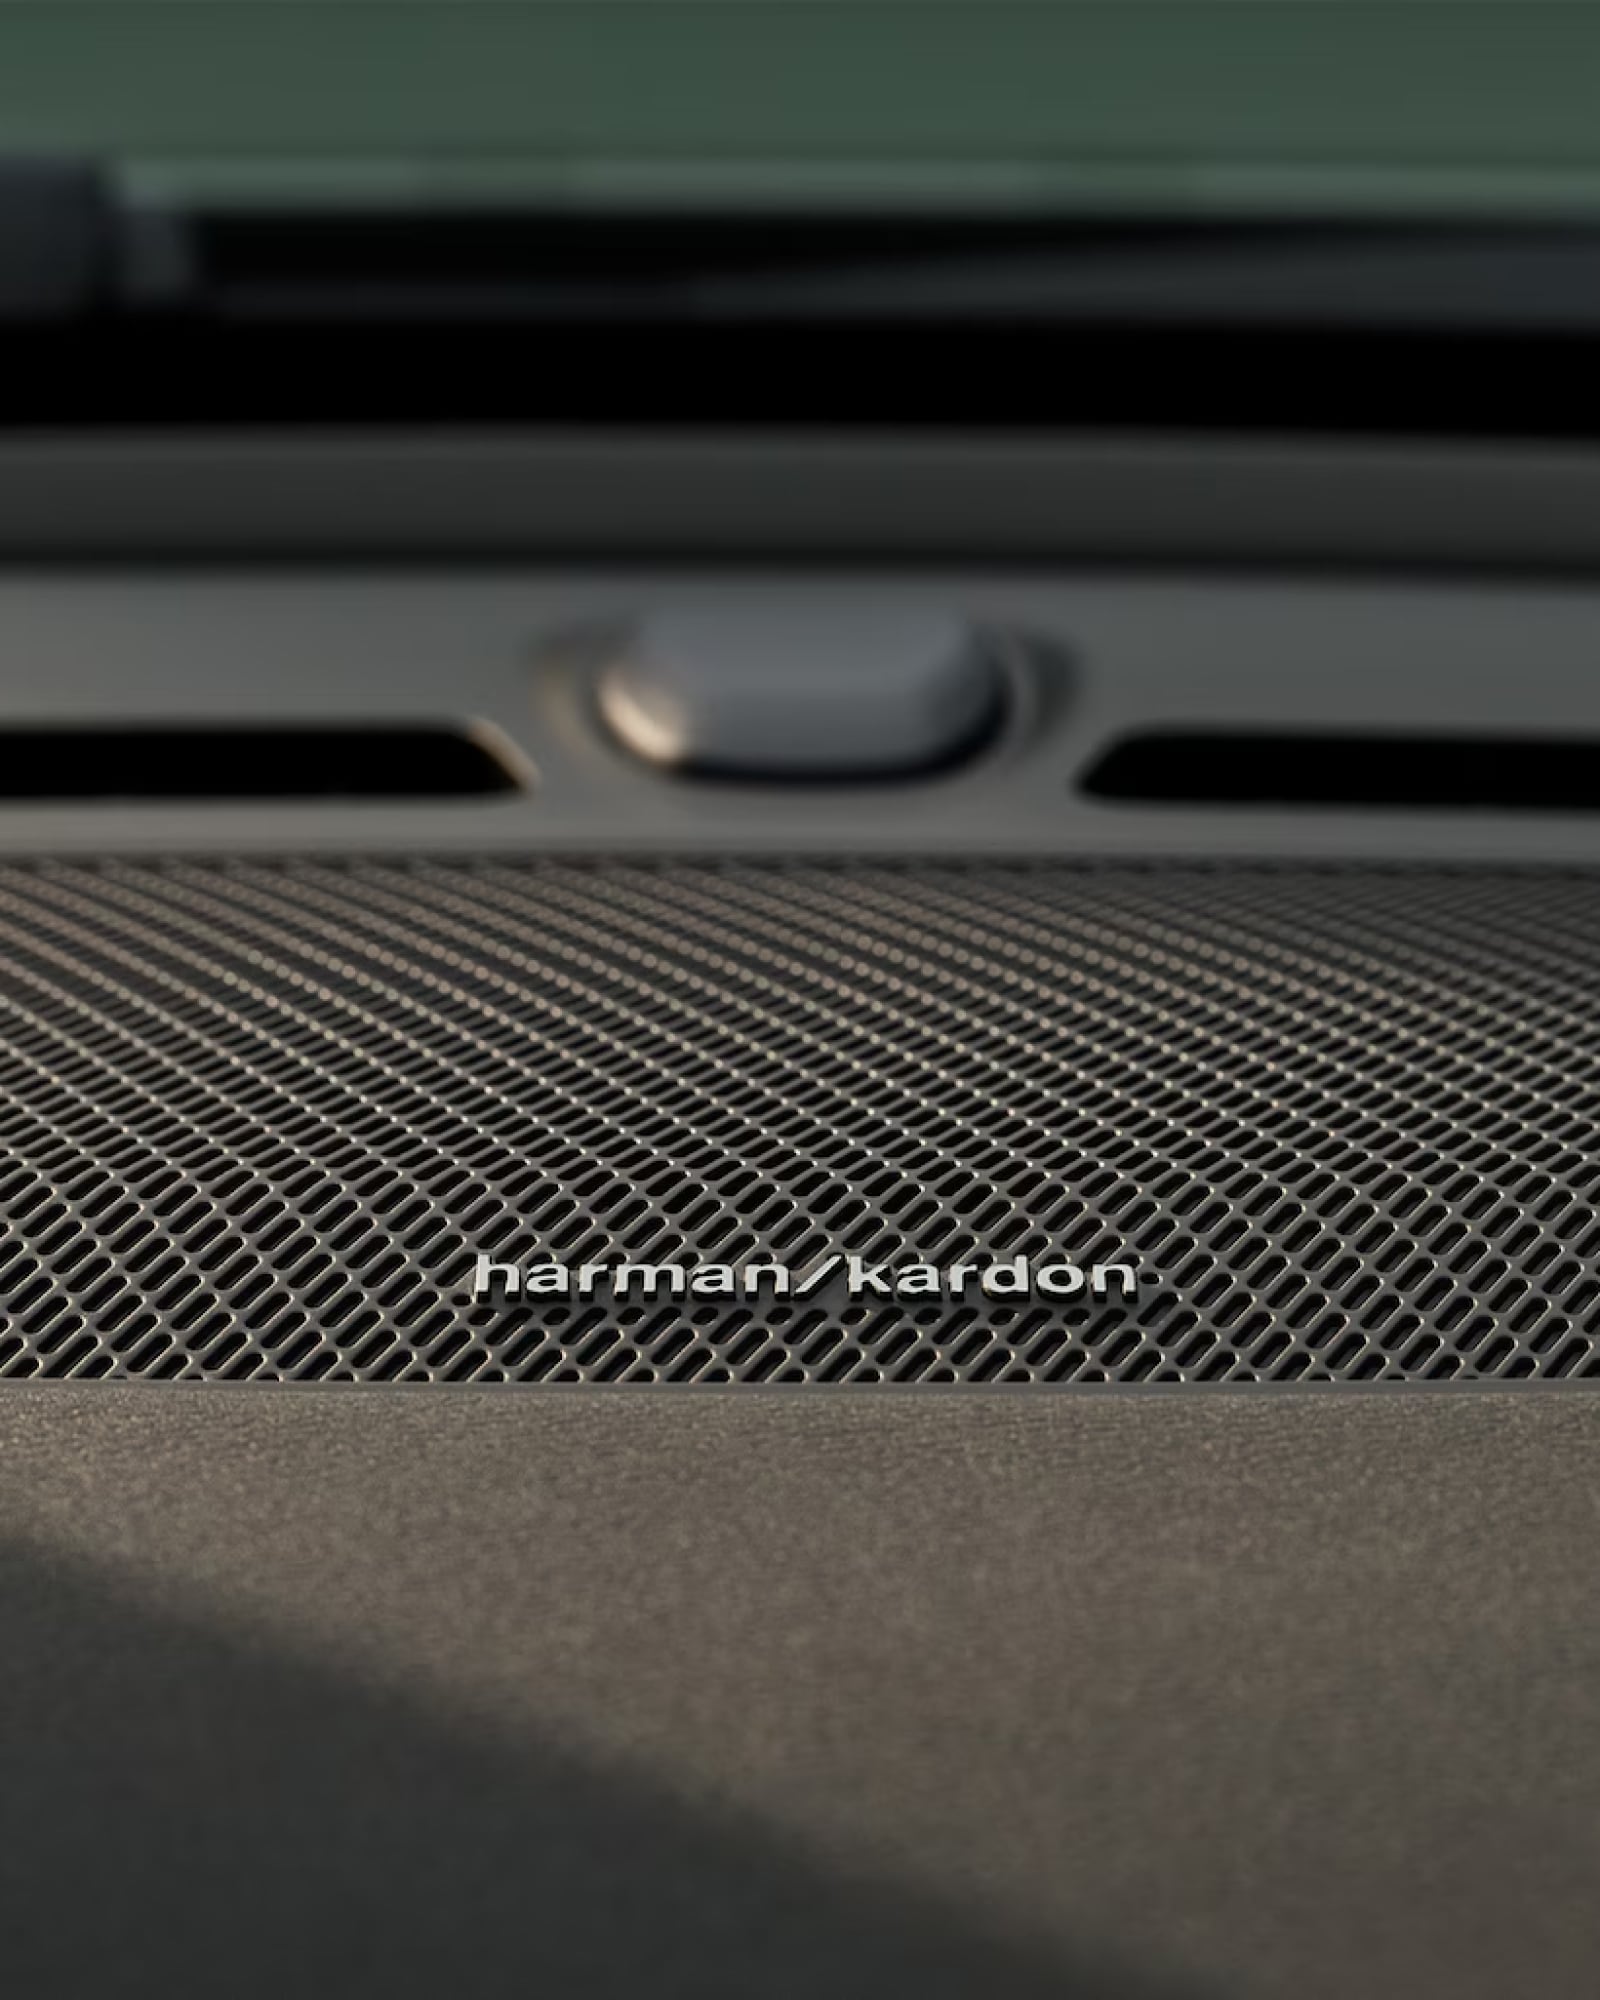 A Harman Kardon speaker, part of the premium sound system available in the Volvo EX40.